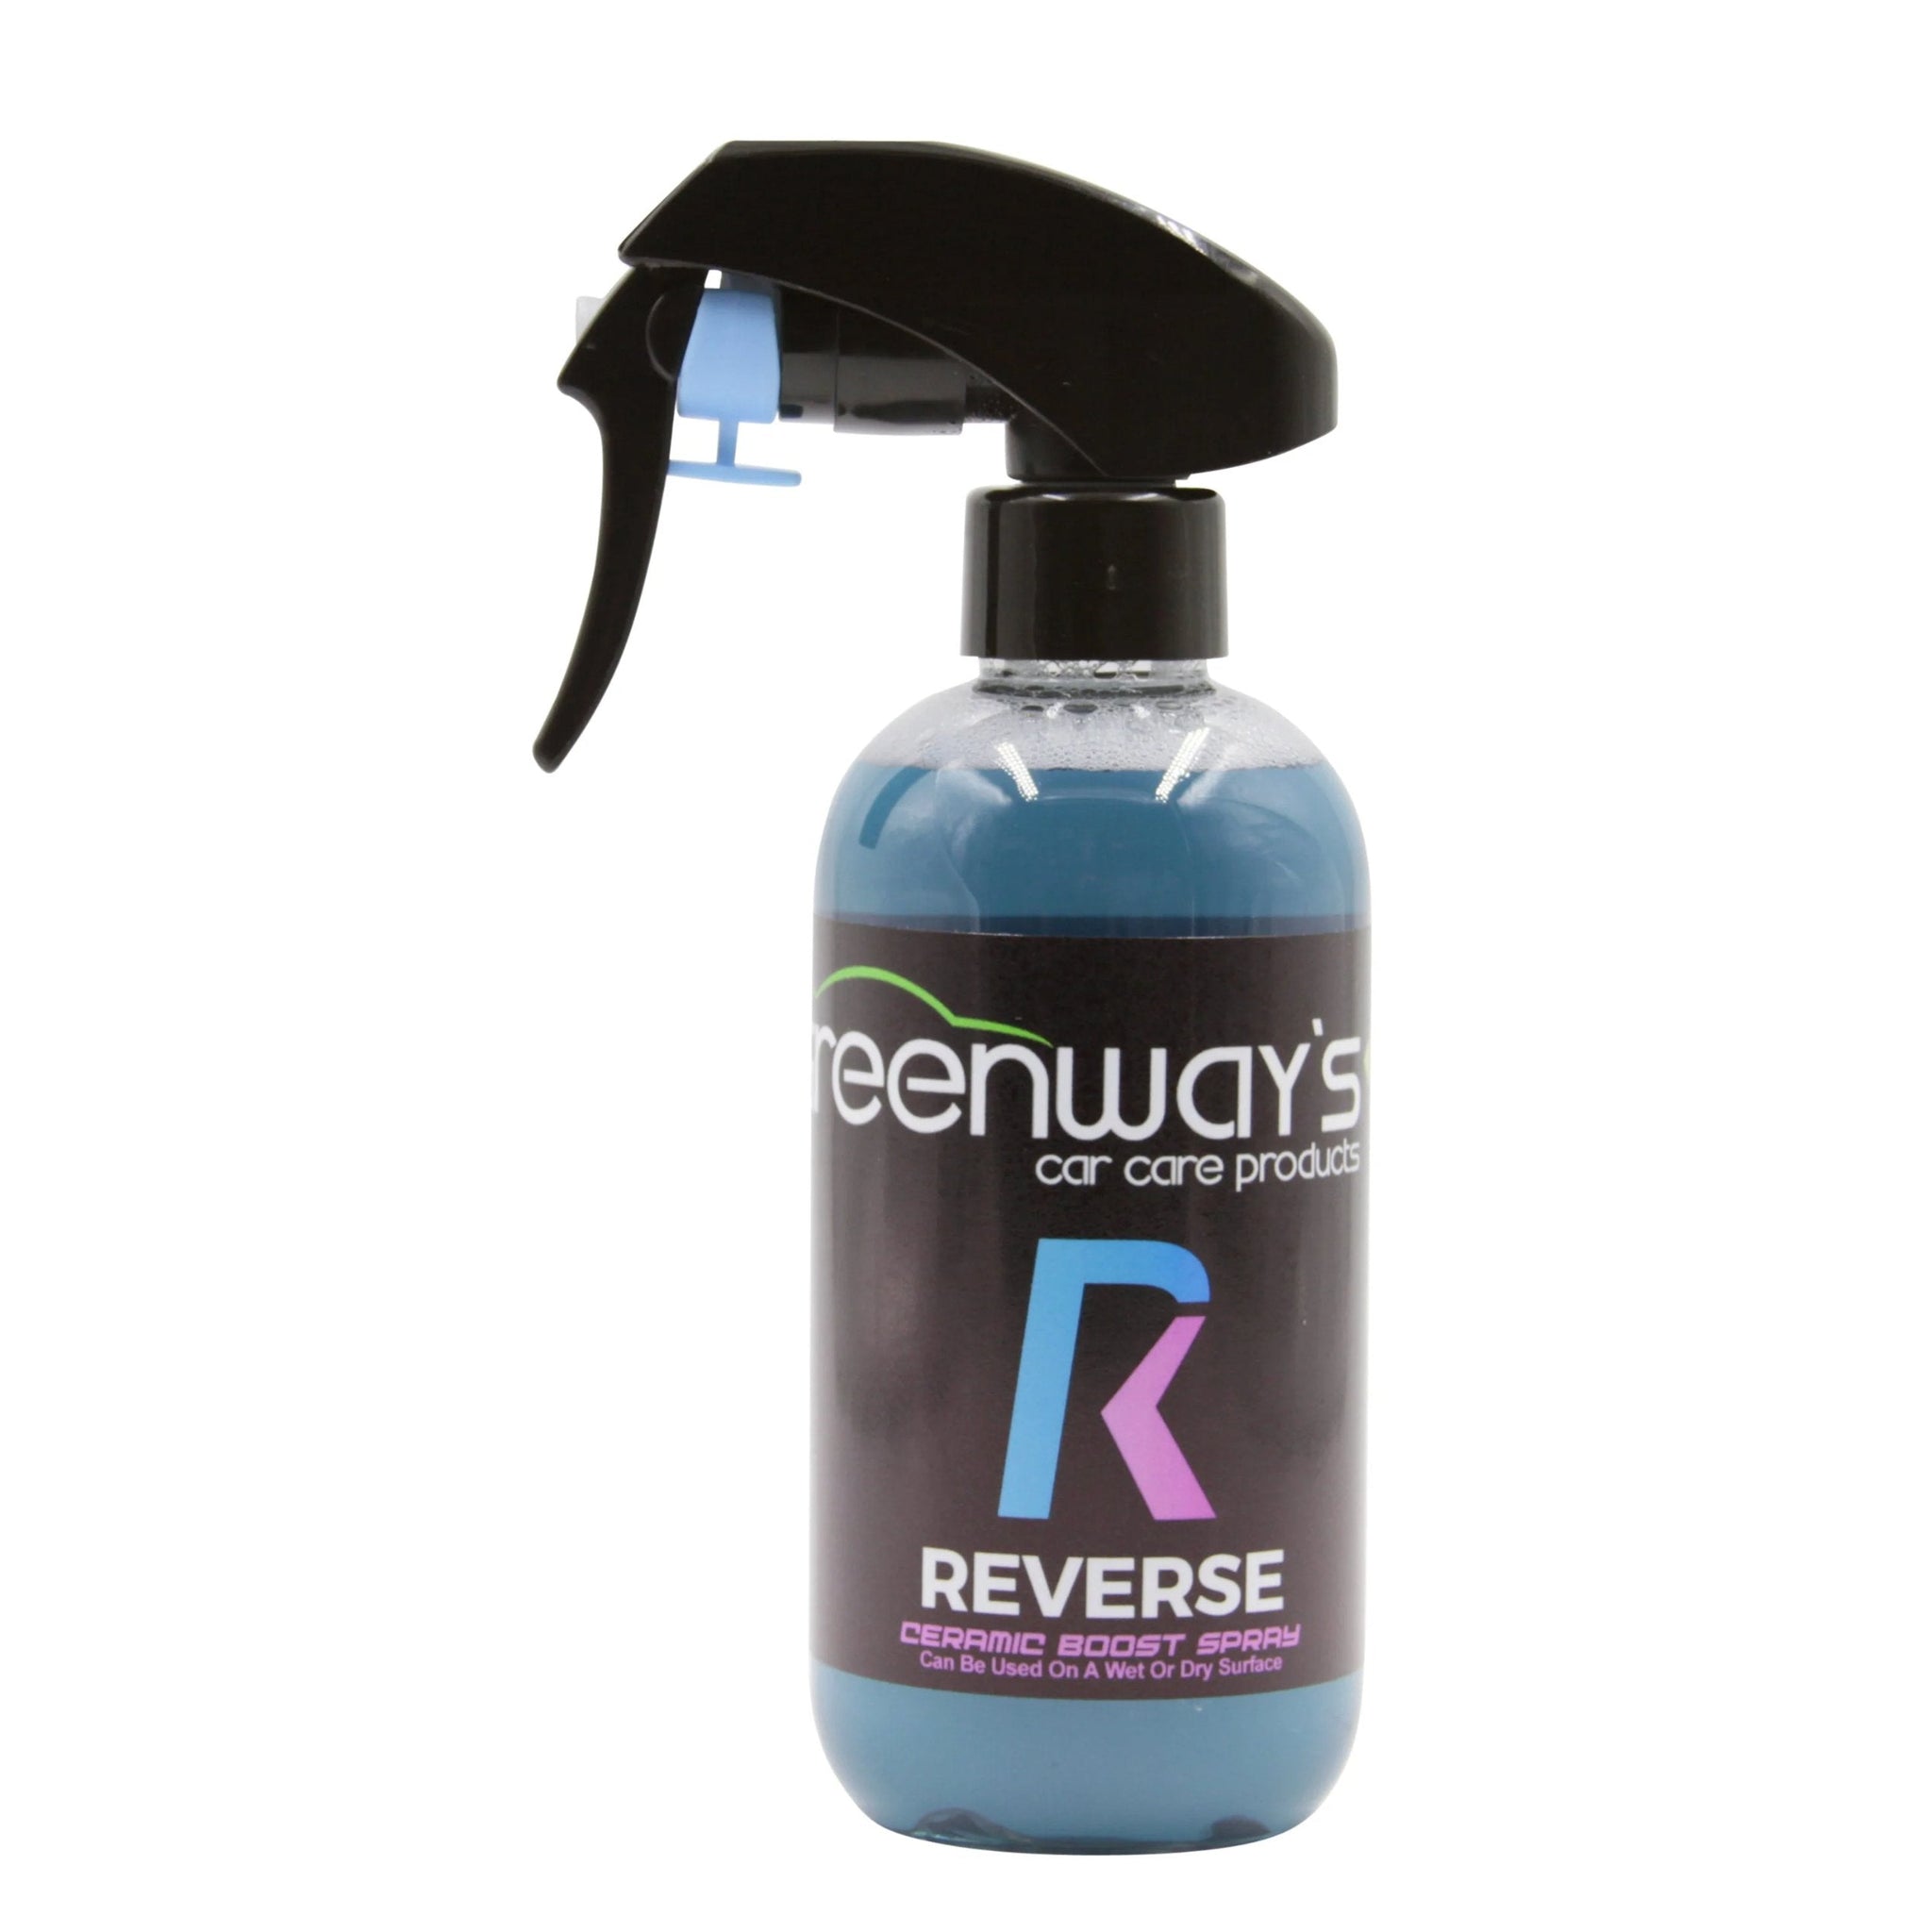 Reverse- Ceramic Coating Maintenance Spray – Greenway's Car Care Products